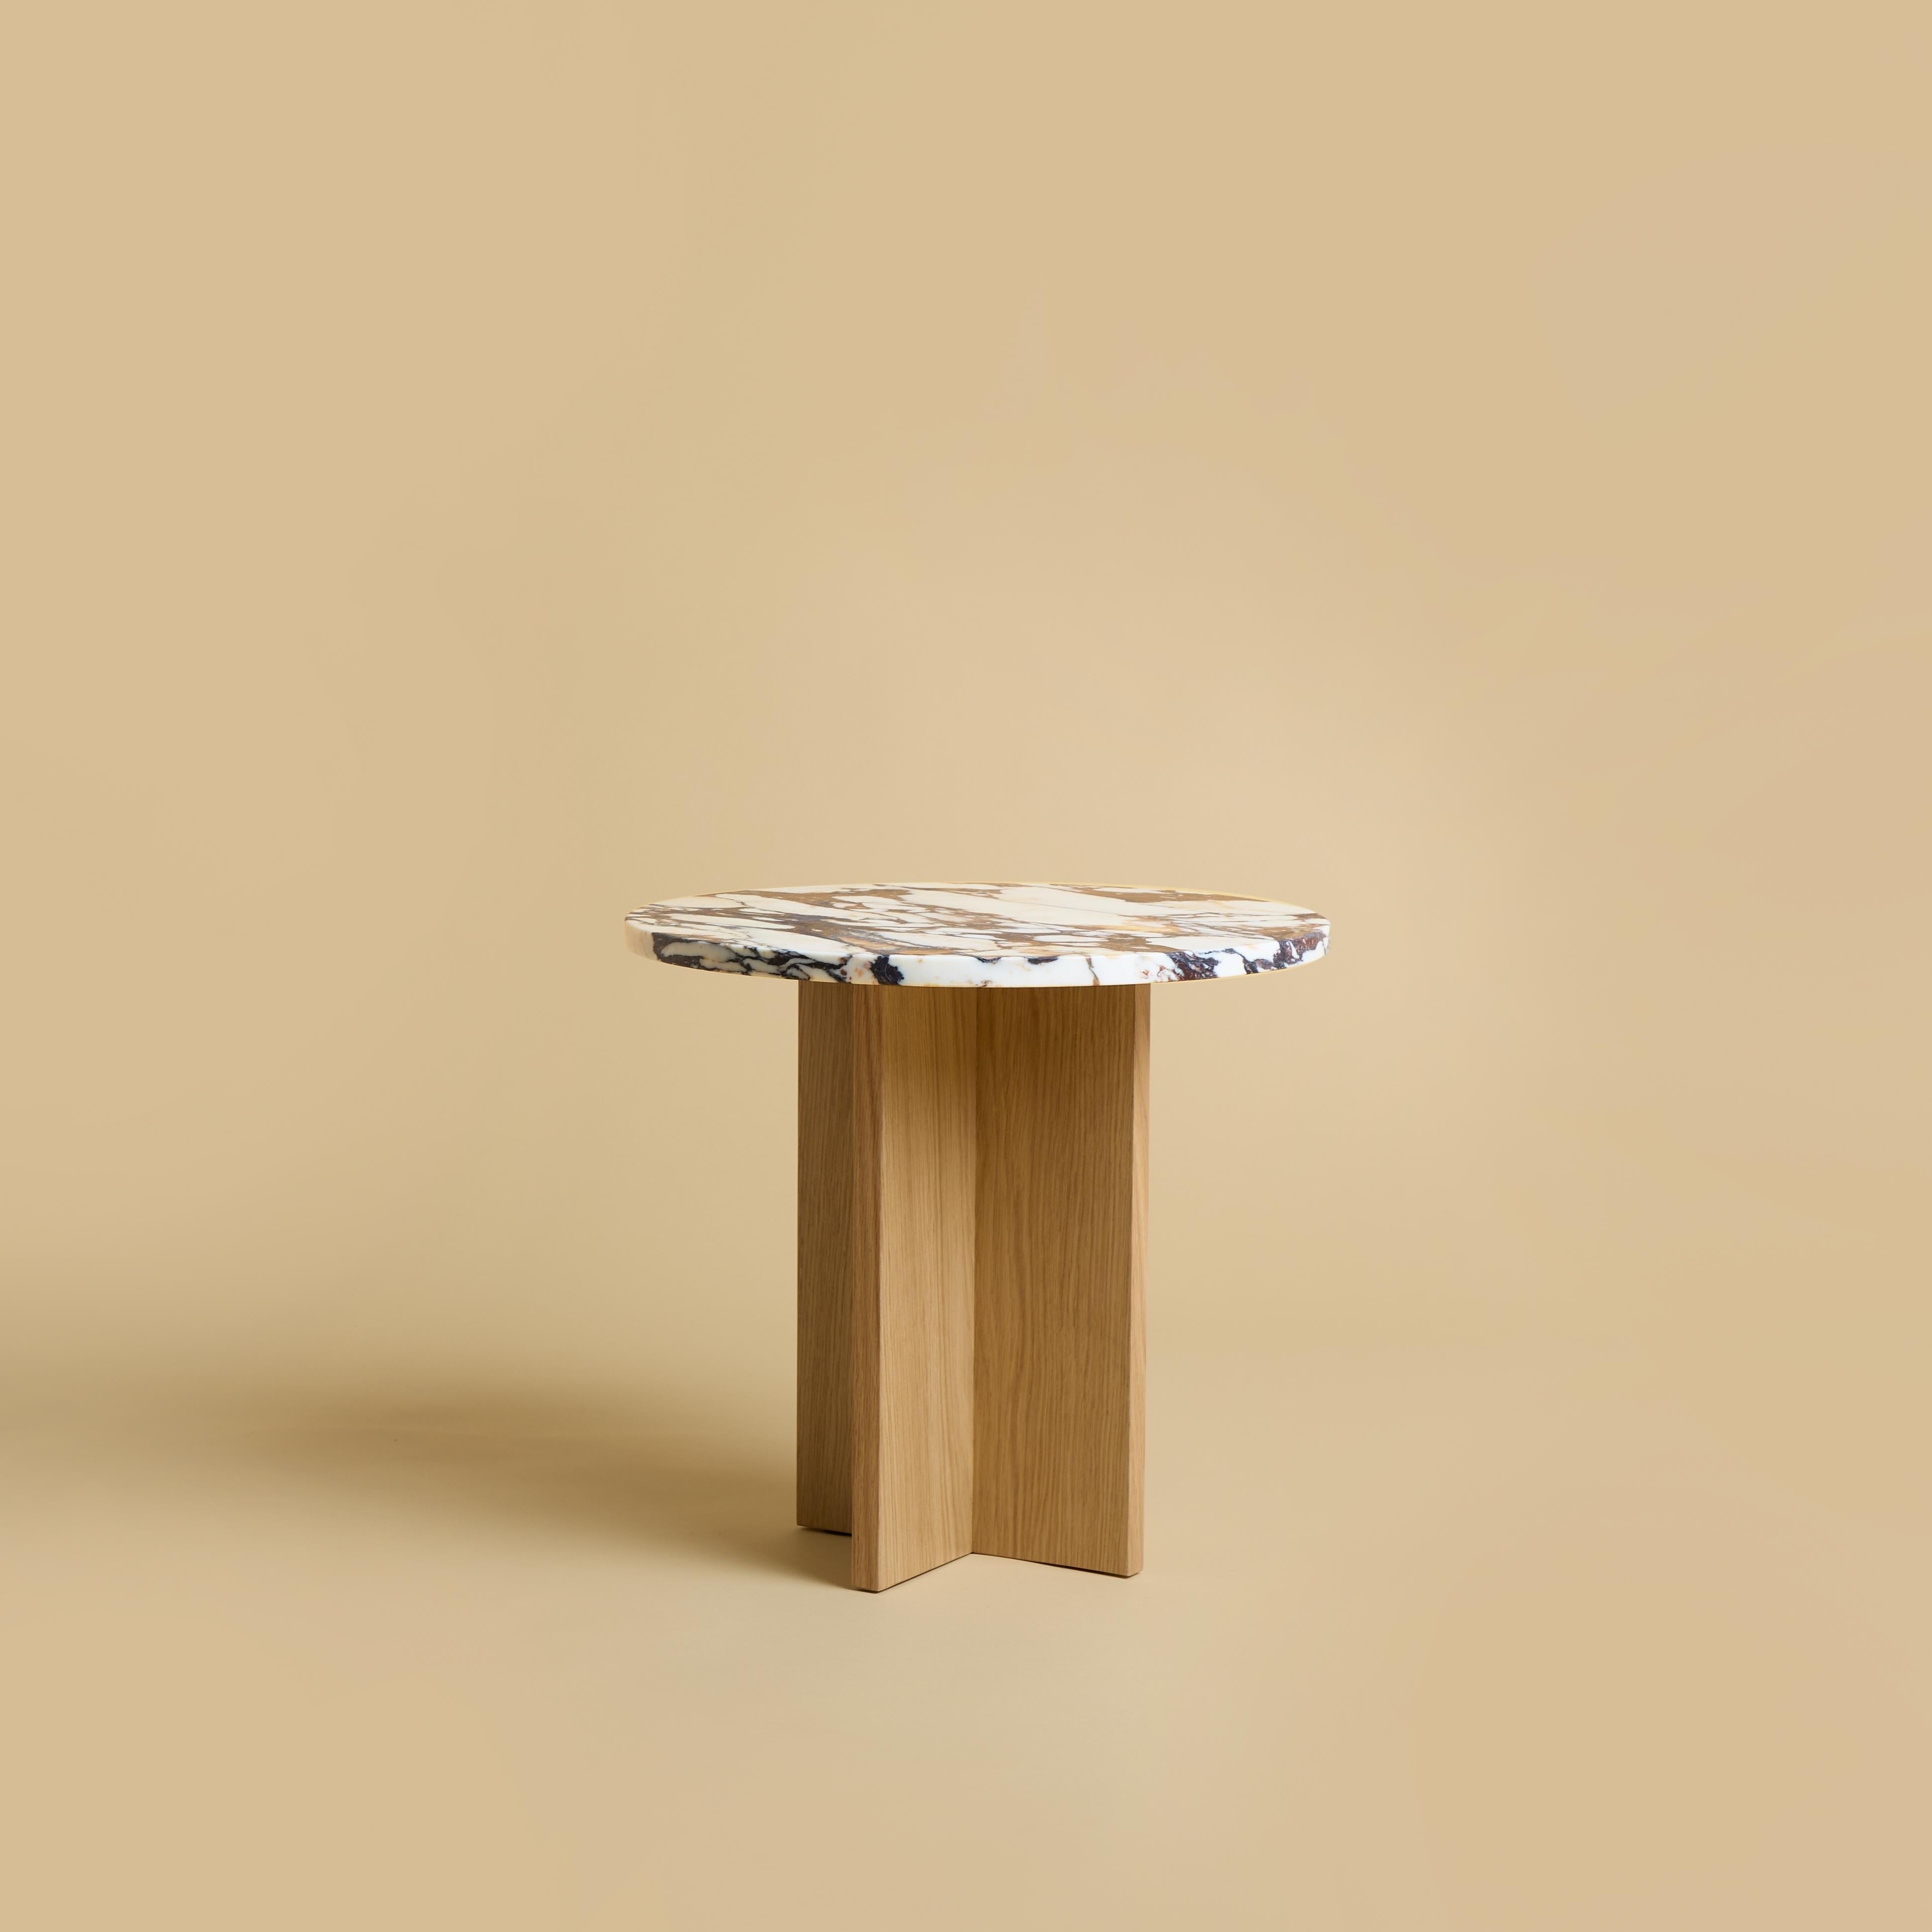 The Sherman coffee table is produced with an oak wood base and Calacatta Viola marble top from Tuscany region. The top is circular and 45cm in diameter, while the base is obtained by gluing oak planks perpendicular to each other.
The piece is